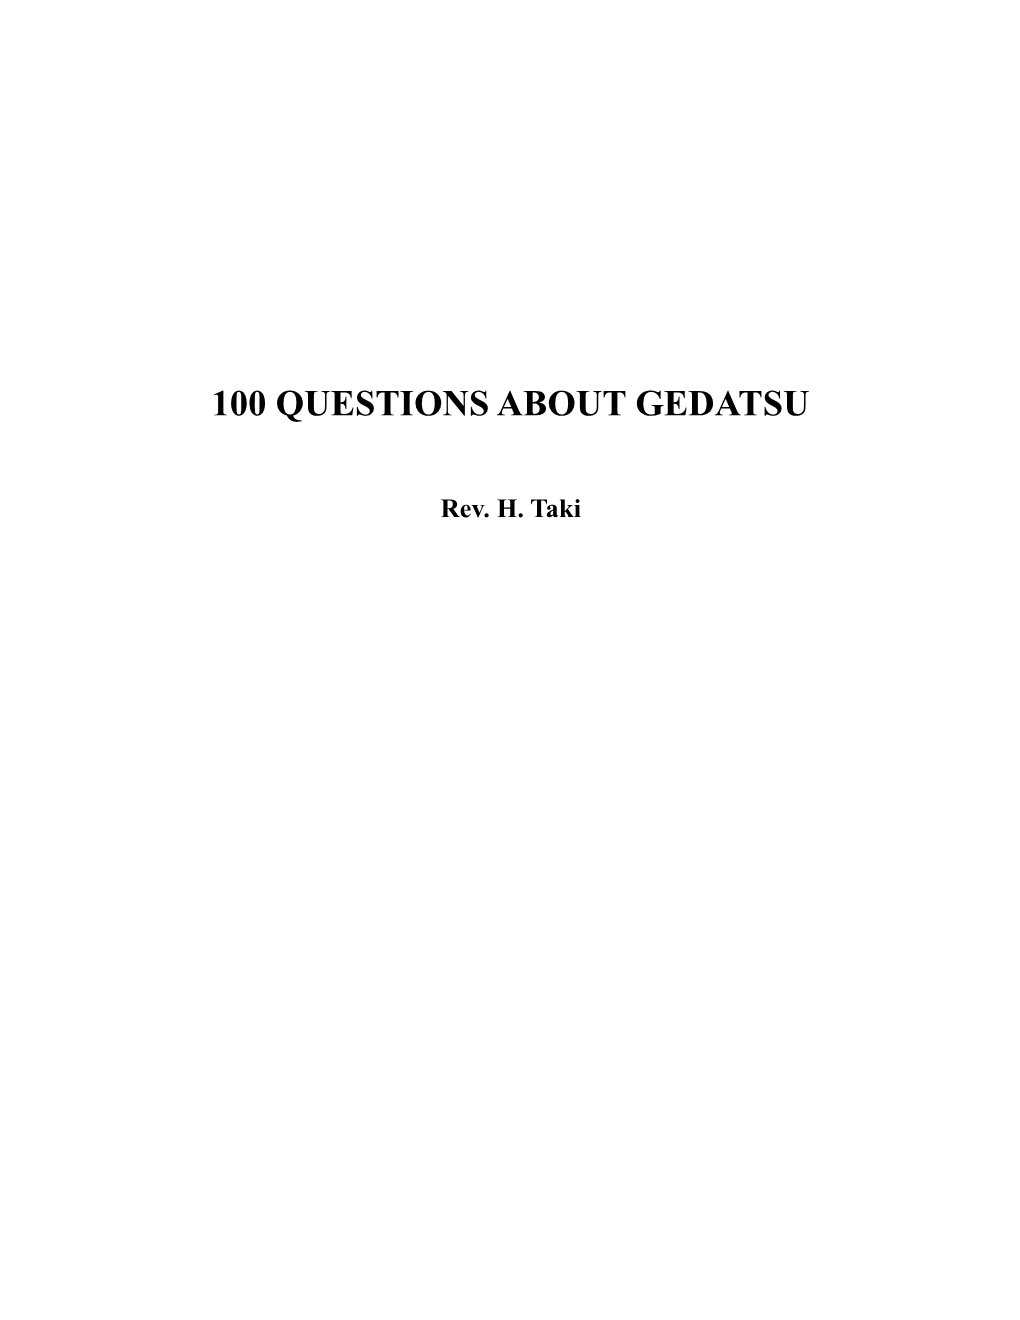 100 Questions About Gedatsu